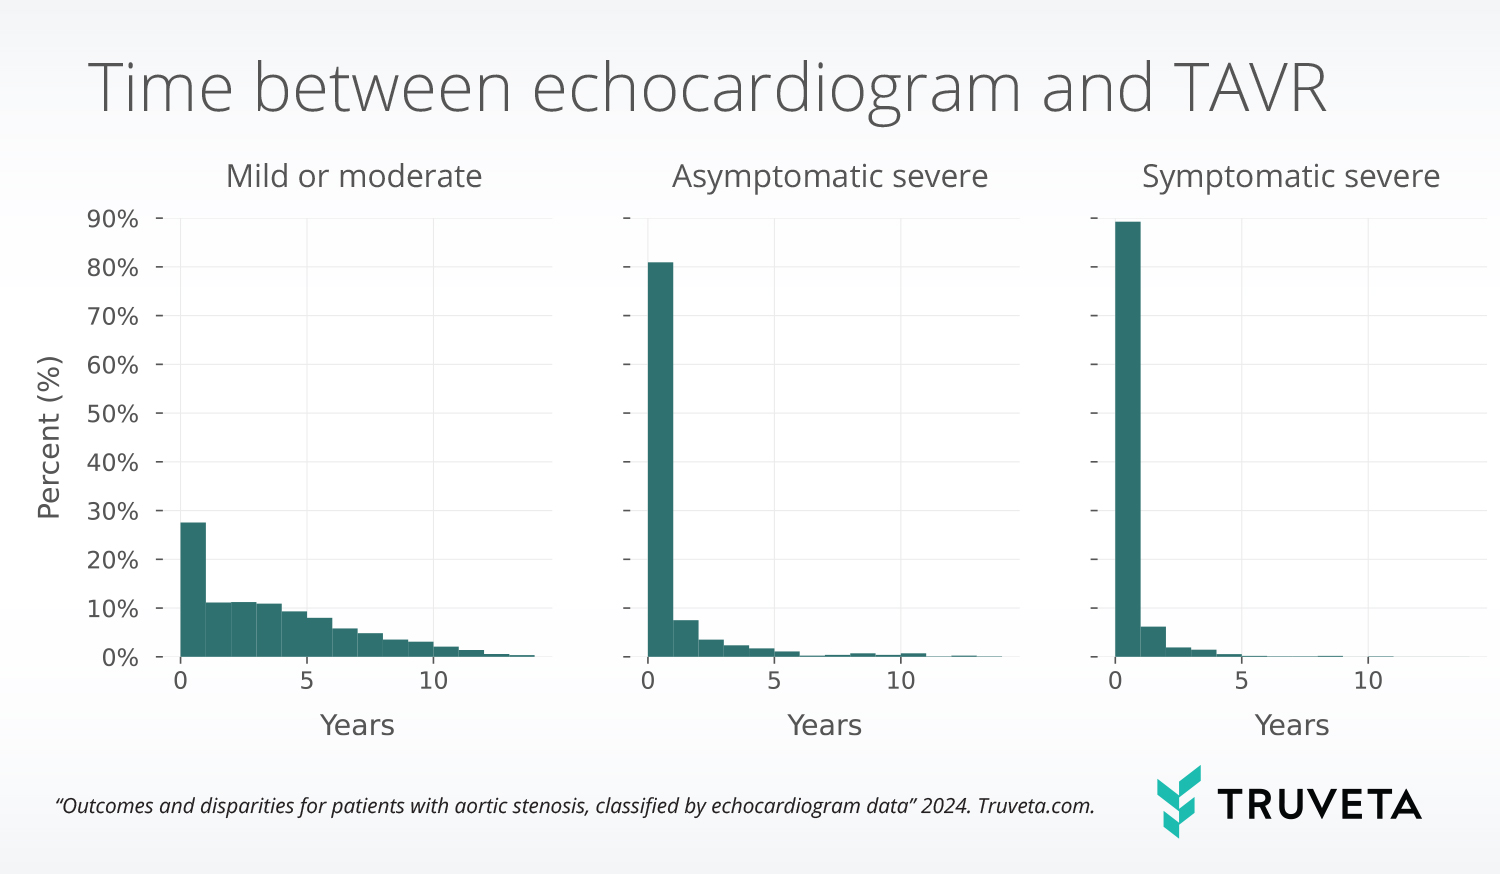 Echocardiogram and EHR data enables researchers to study patient outcomes and potential disparities among those with aortic stenosis